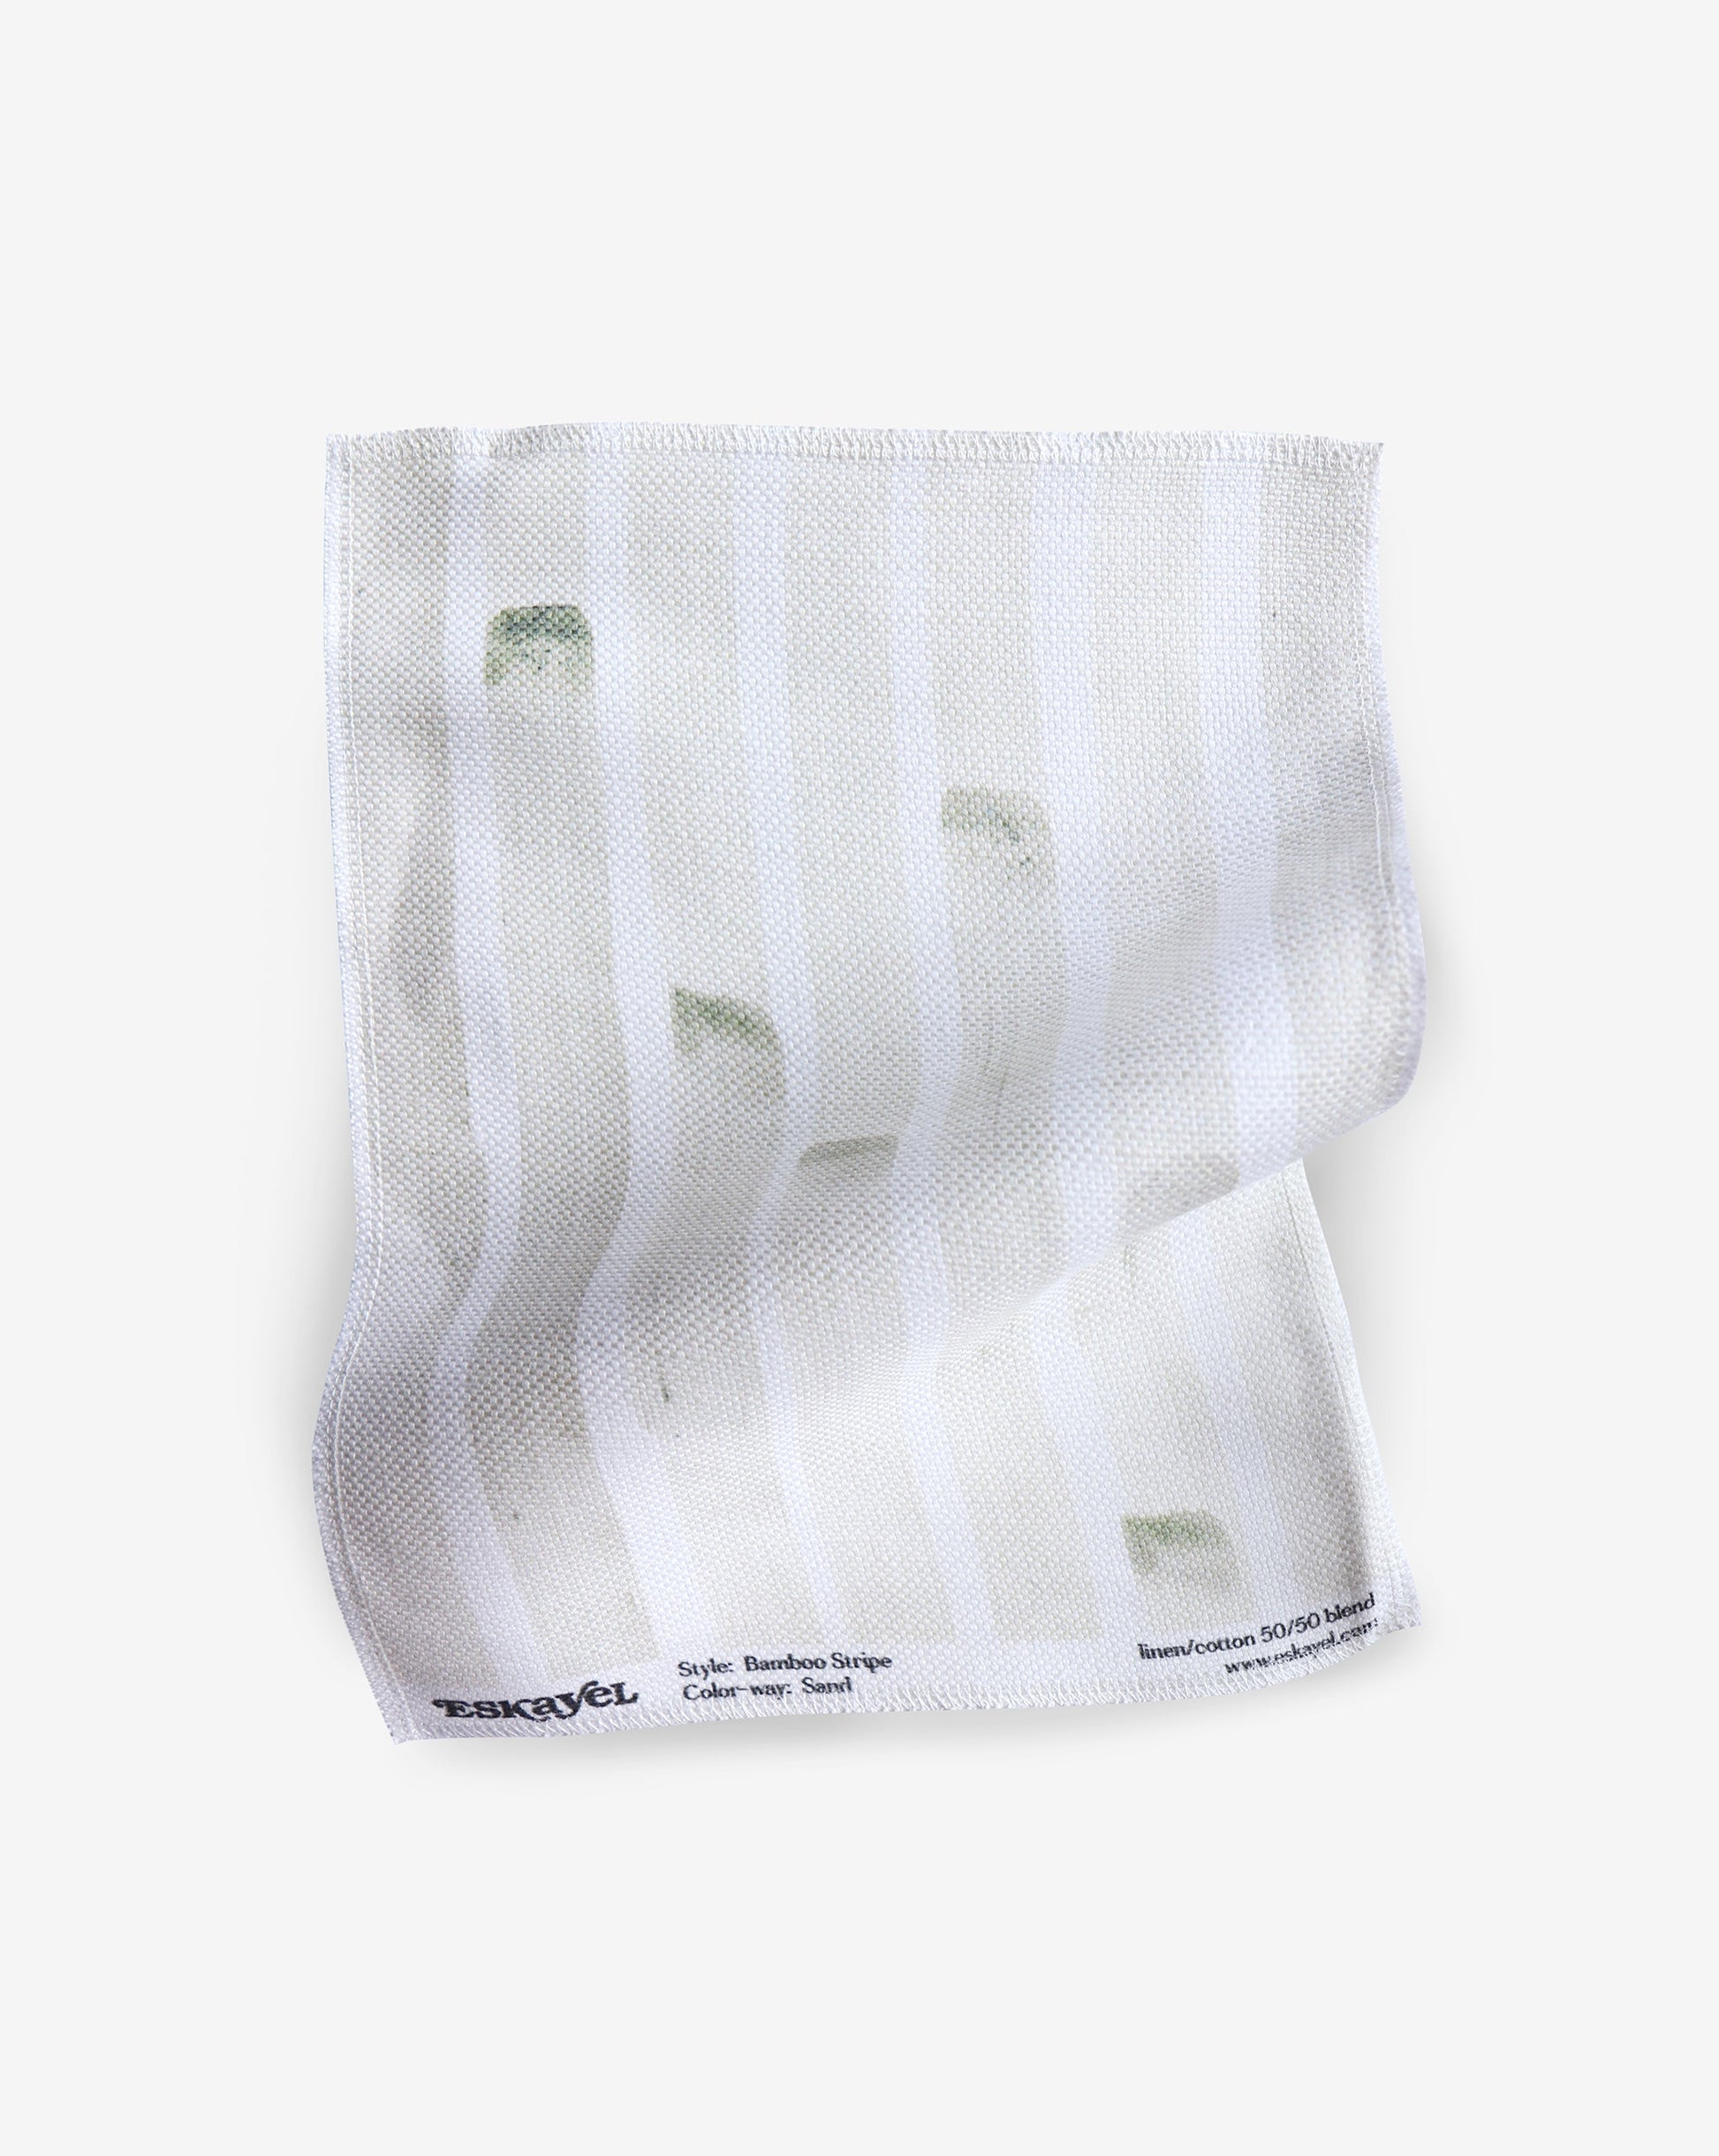 A white Bamboo Stripe Fabric hankerchief with green stripes on it.